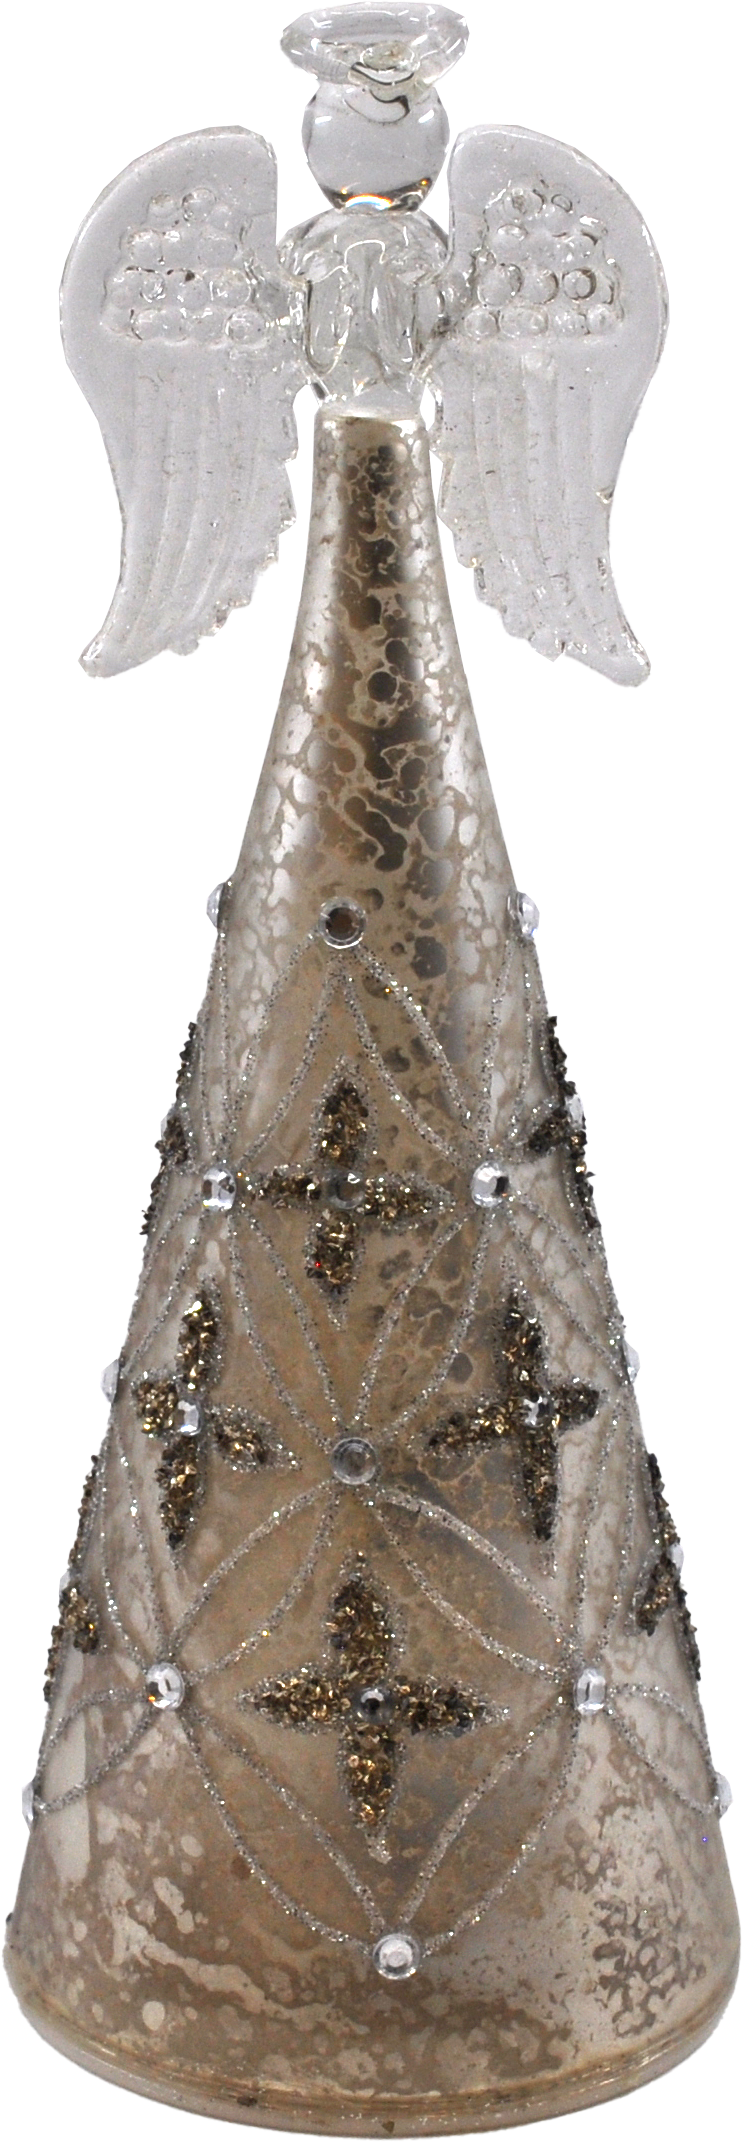 Crystal Castle Cone Light Up Angel